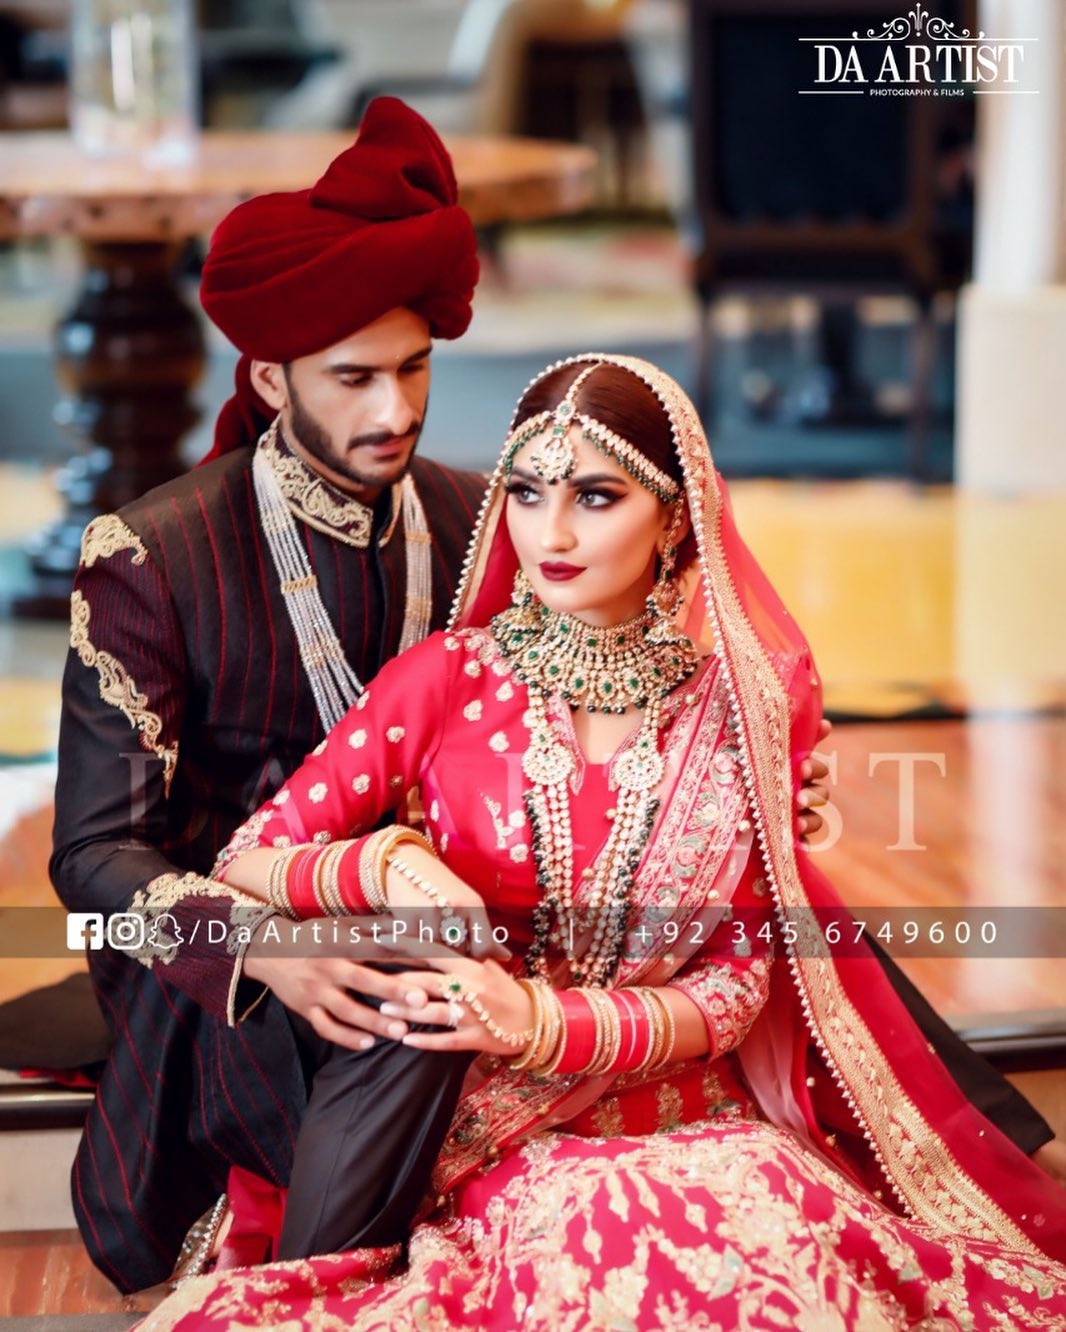 Inspiration 35 of Hassan Khan Wedding Pictures